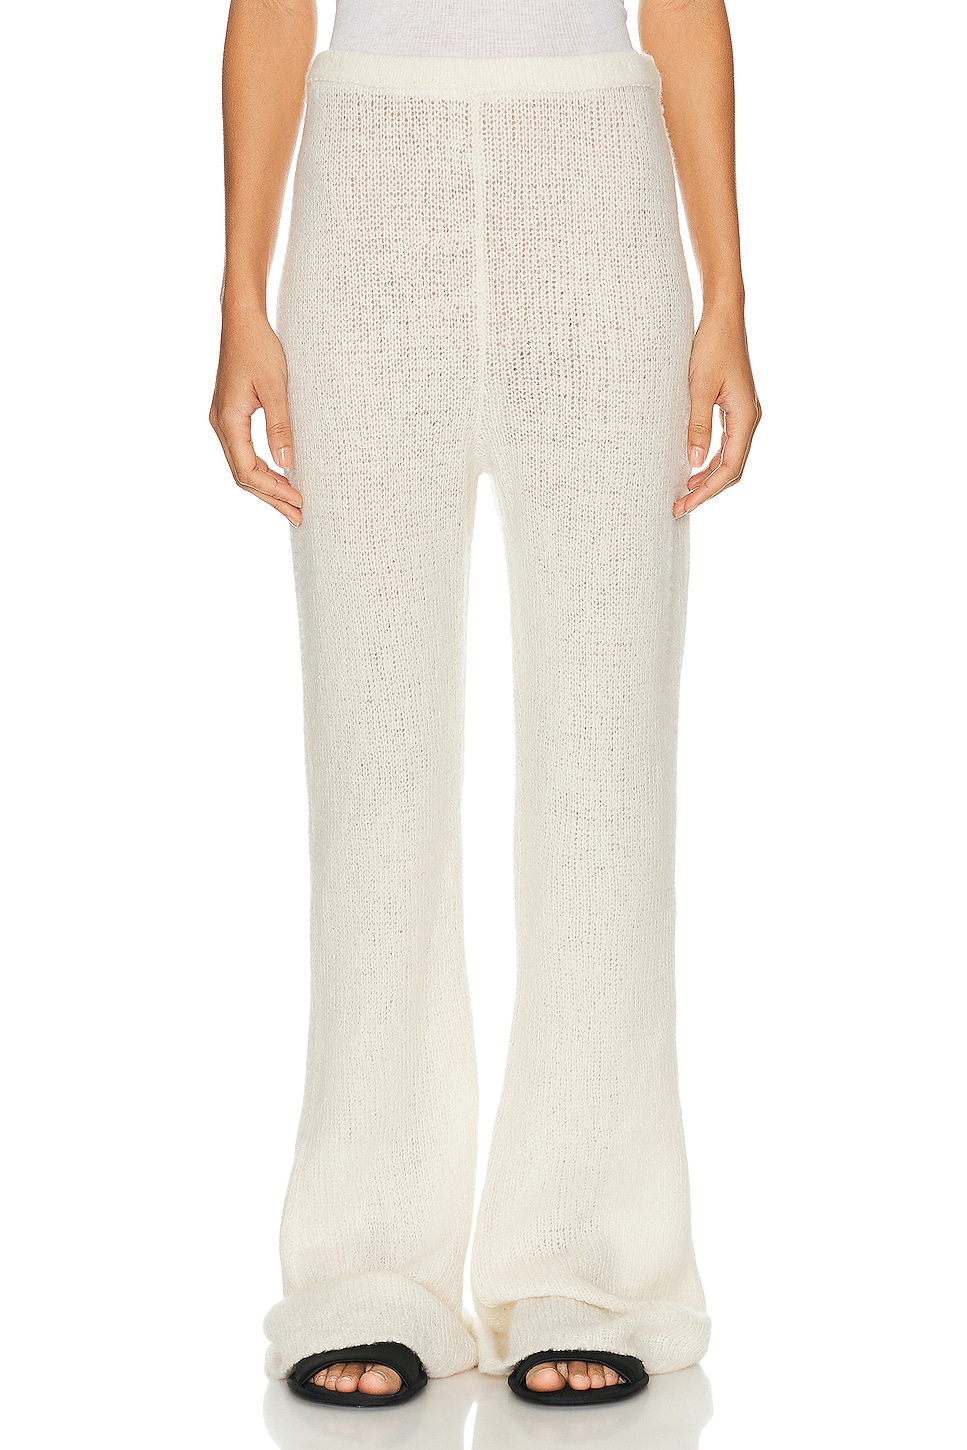 Image 1 of The Row Gregori Pant in Greige